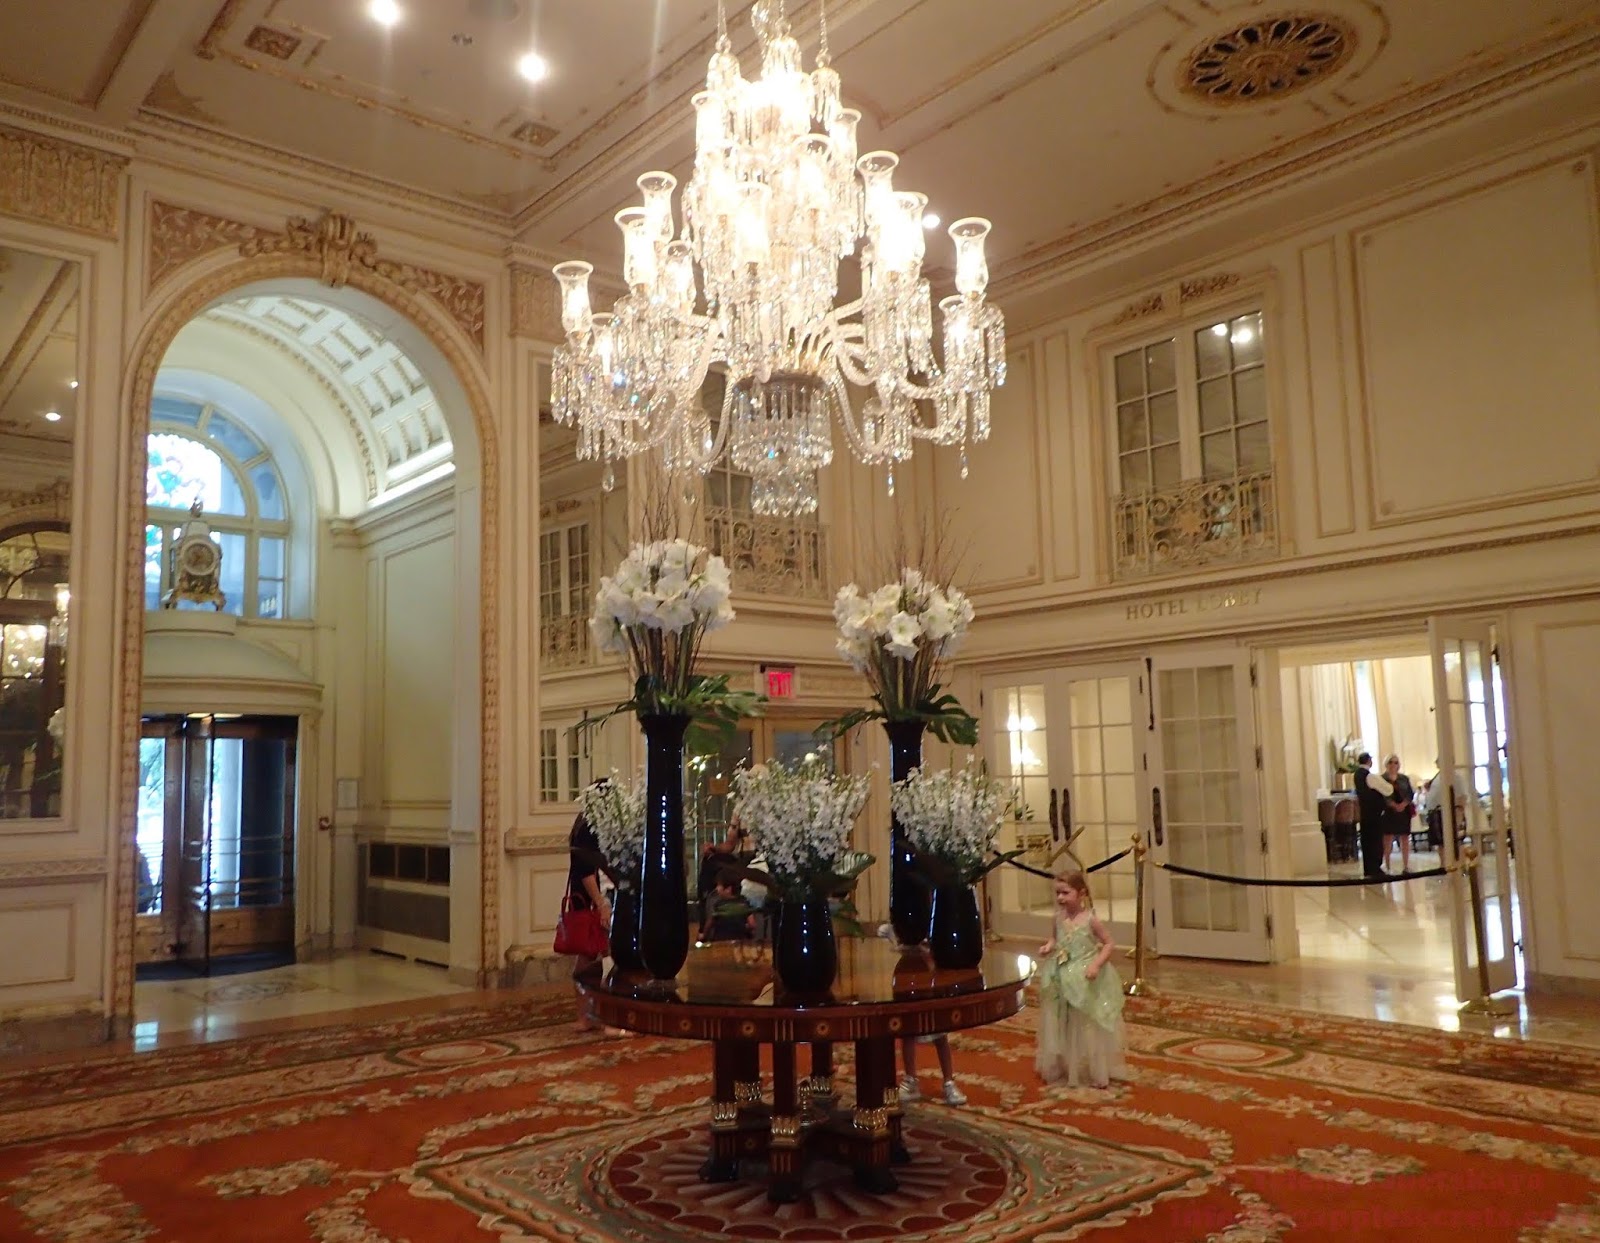 New York Picture of the Day The Plaza Hotel Lobby. When the hotel